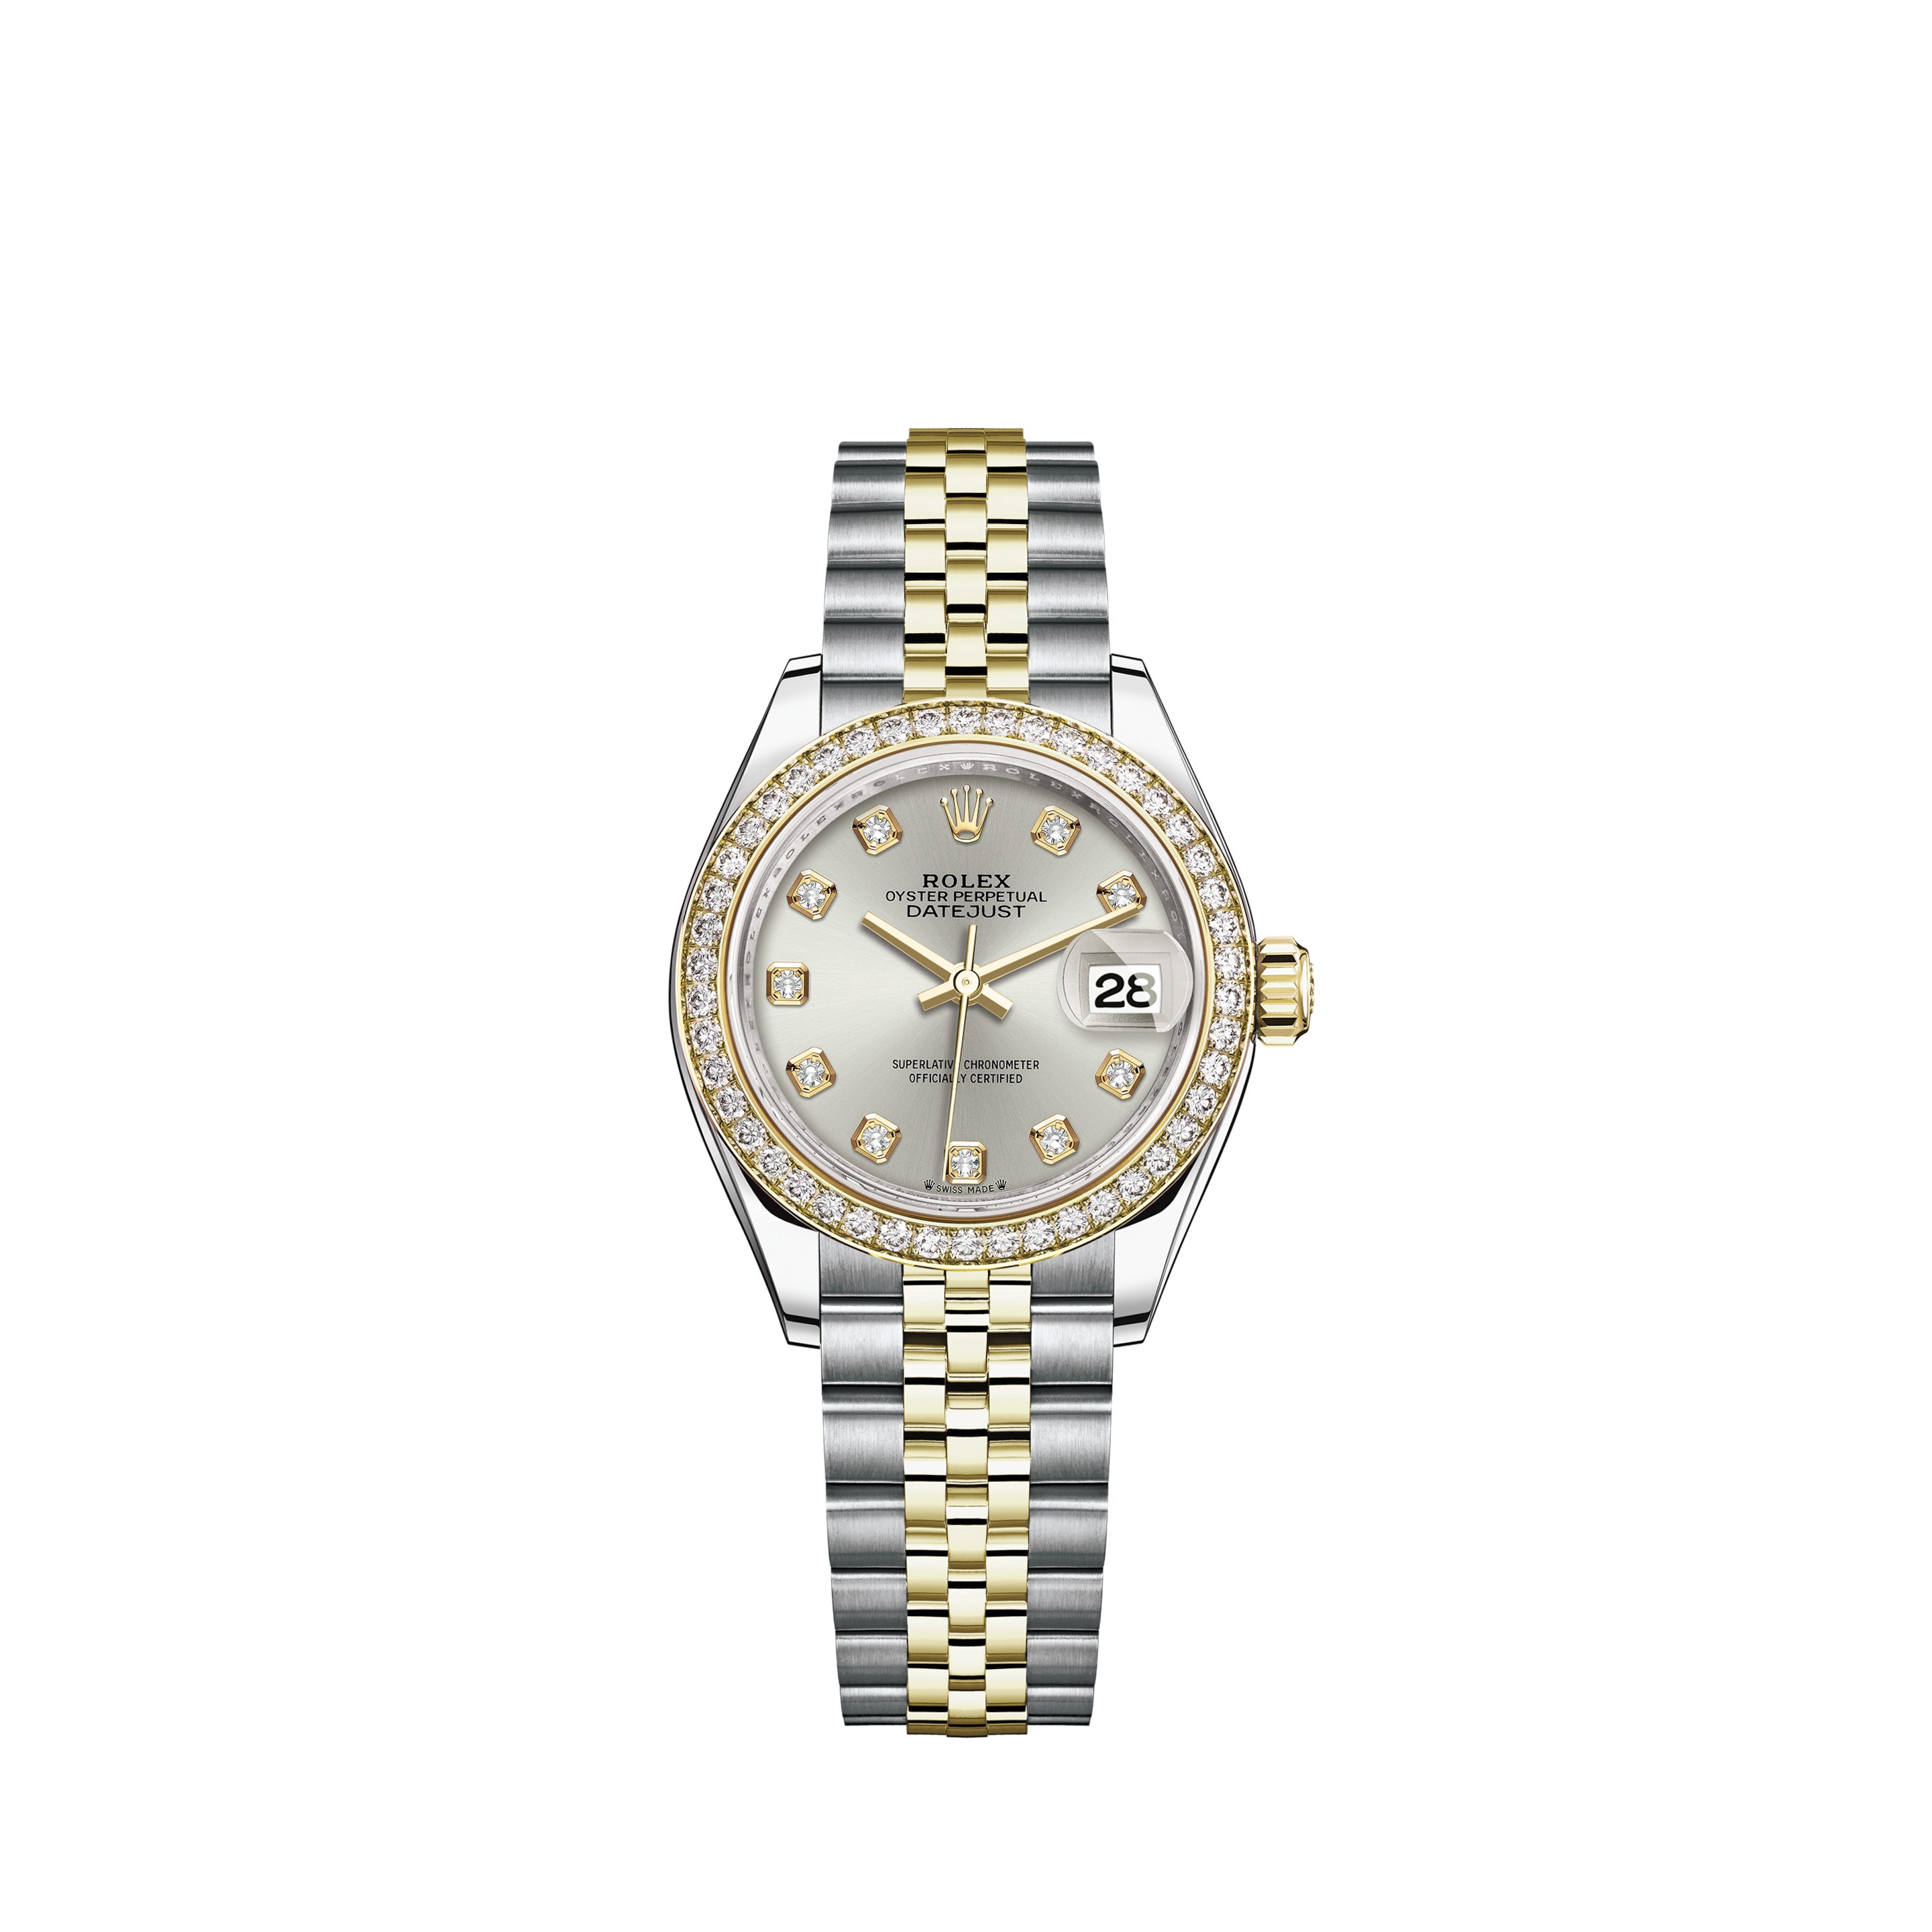 Rolex Datejust Stainless Steel Ladies Watch Automatic Winding 179174Rolex Datejust Thunderbird Gilt Dial